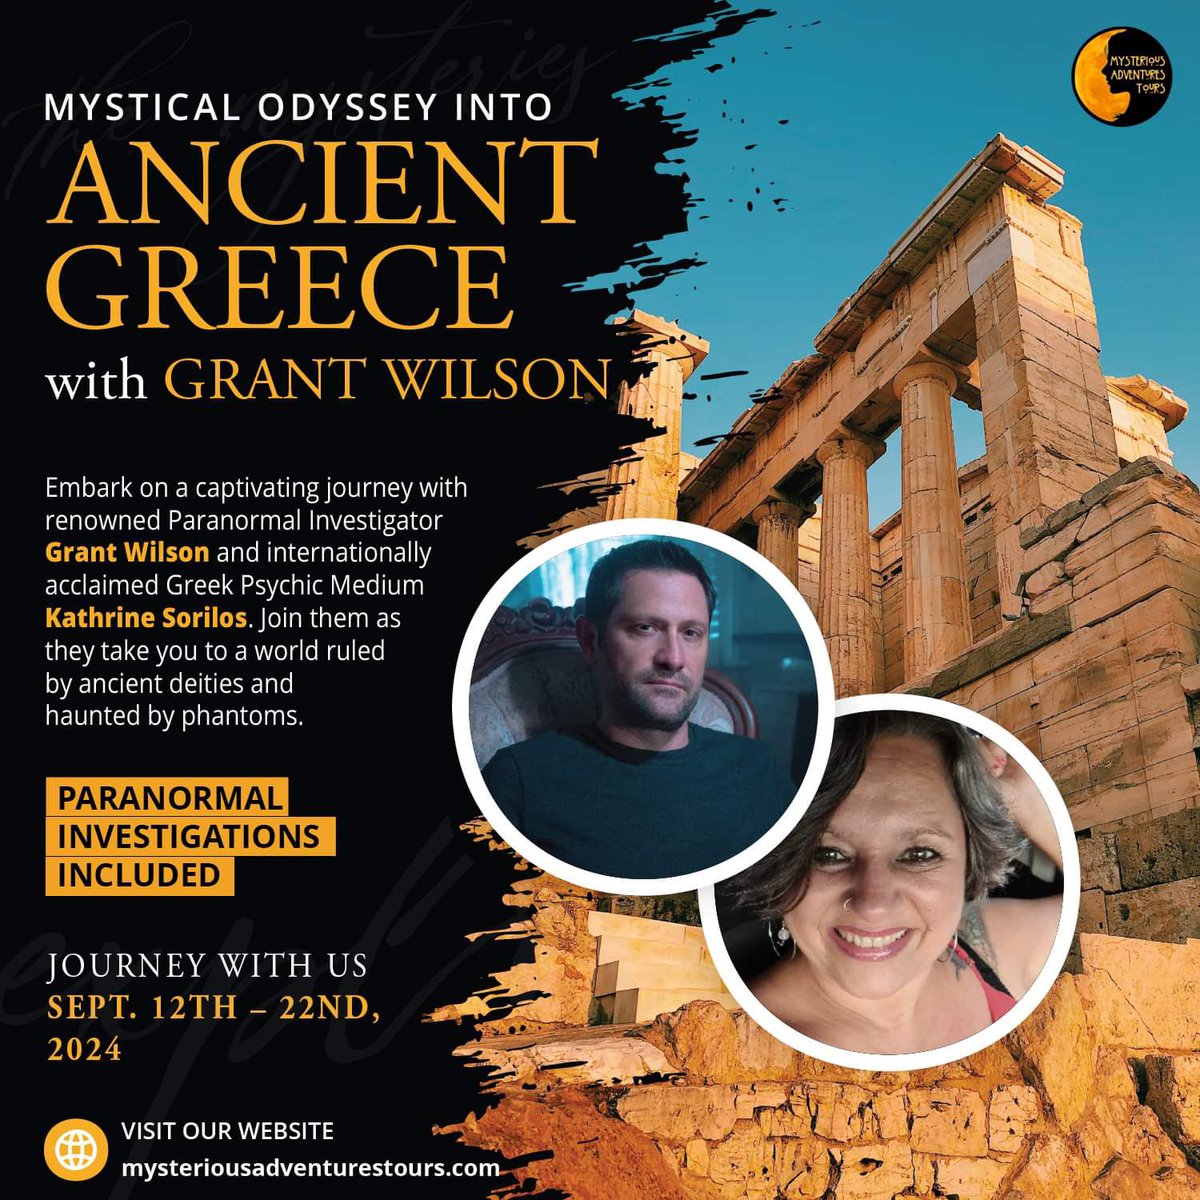 Join @ReannaWilson3 and I, along with our charming and talented guide Katherine Sorilos as we explore and investigate the history and mysteries of Greece! Head on over to MysteriousAdventuresTours.com @MystAdventures #greece #paranormal #grantwilson #ghosthunters #haunting #tours